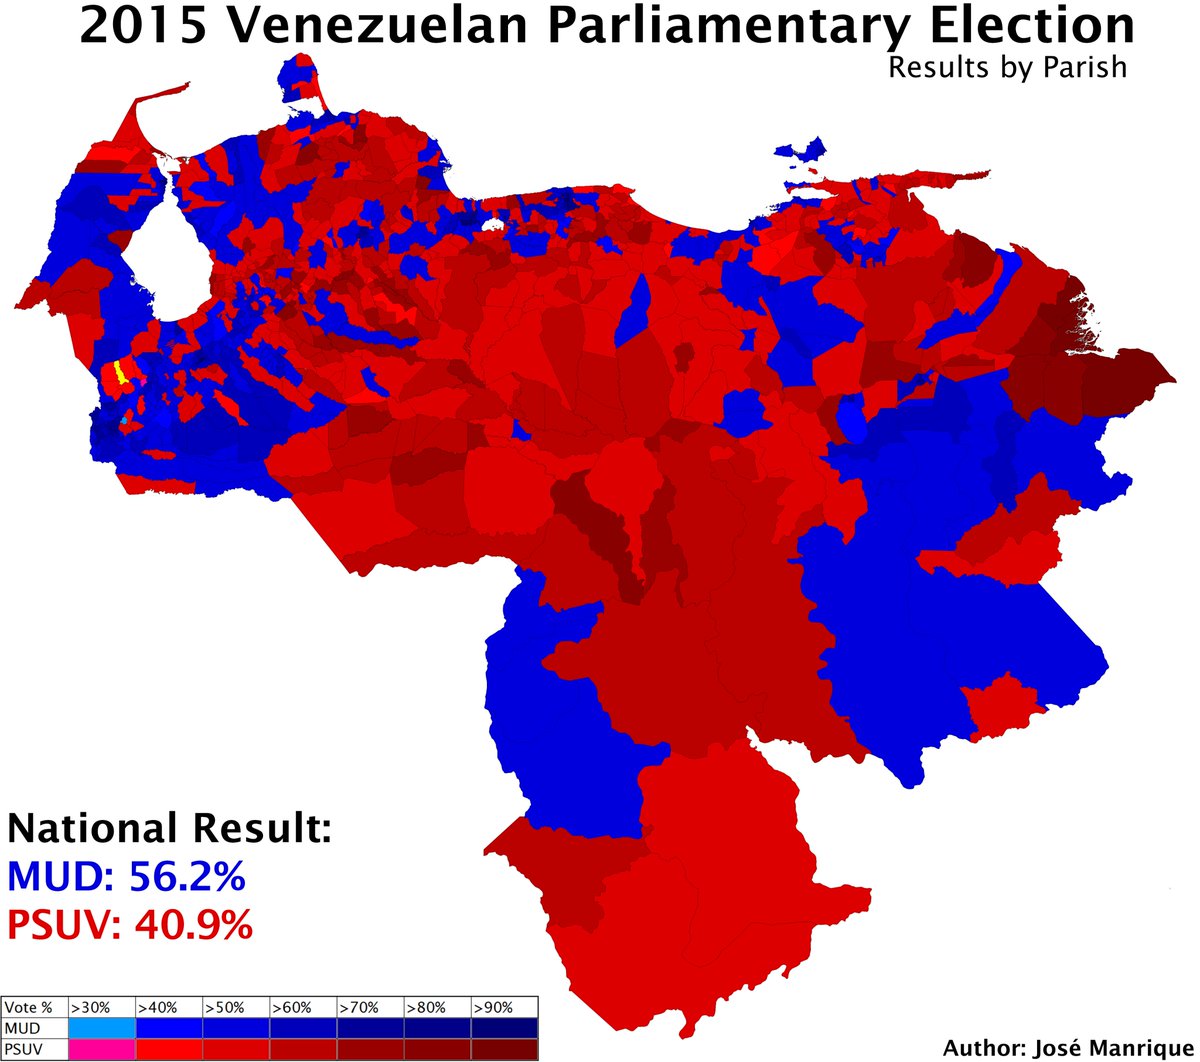 Here's the Parish results map. Chavismo was almost entirely reduced to winning mostly rural parishes, though they did manage to maintain some deep red urban areas, notably Acarigua-Araure in Portuguesa and los Valles del Tuy in Miranda.